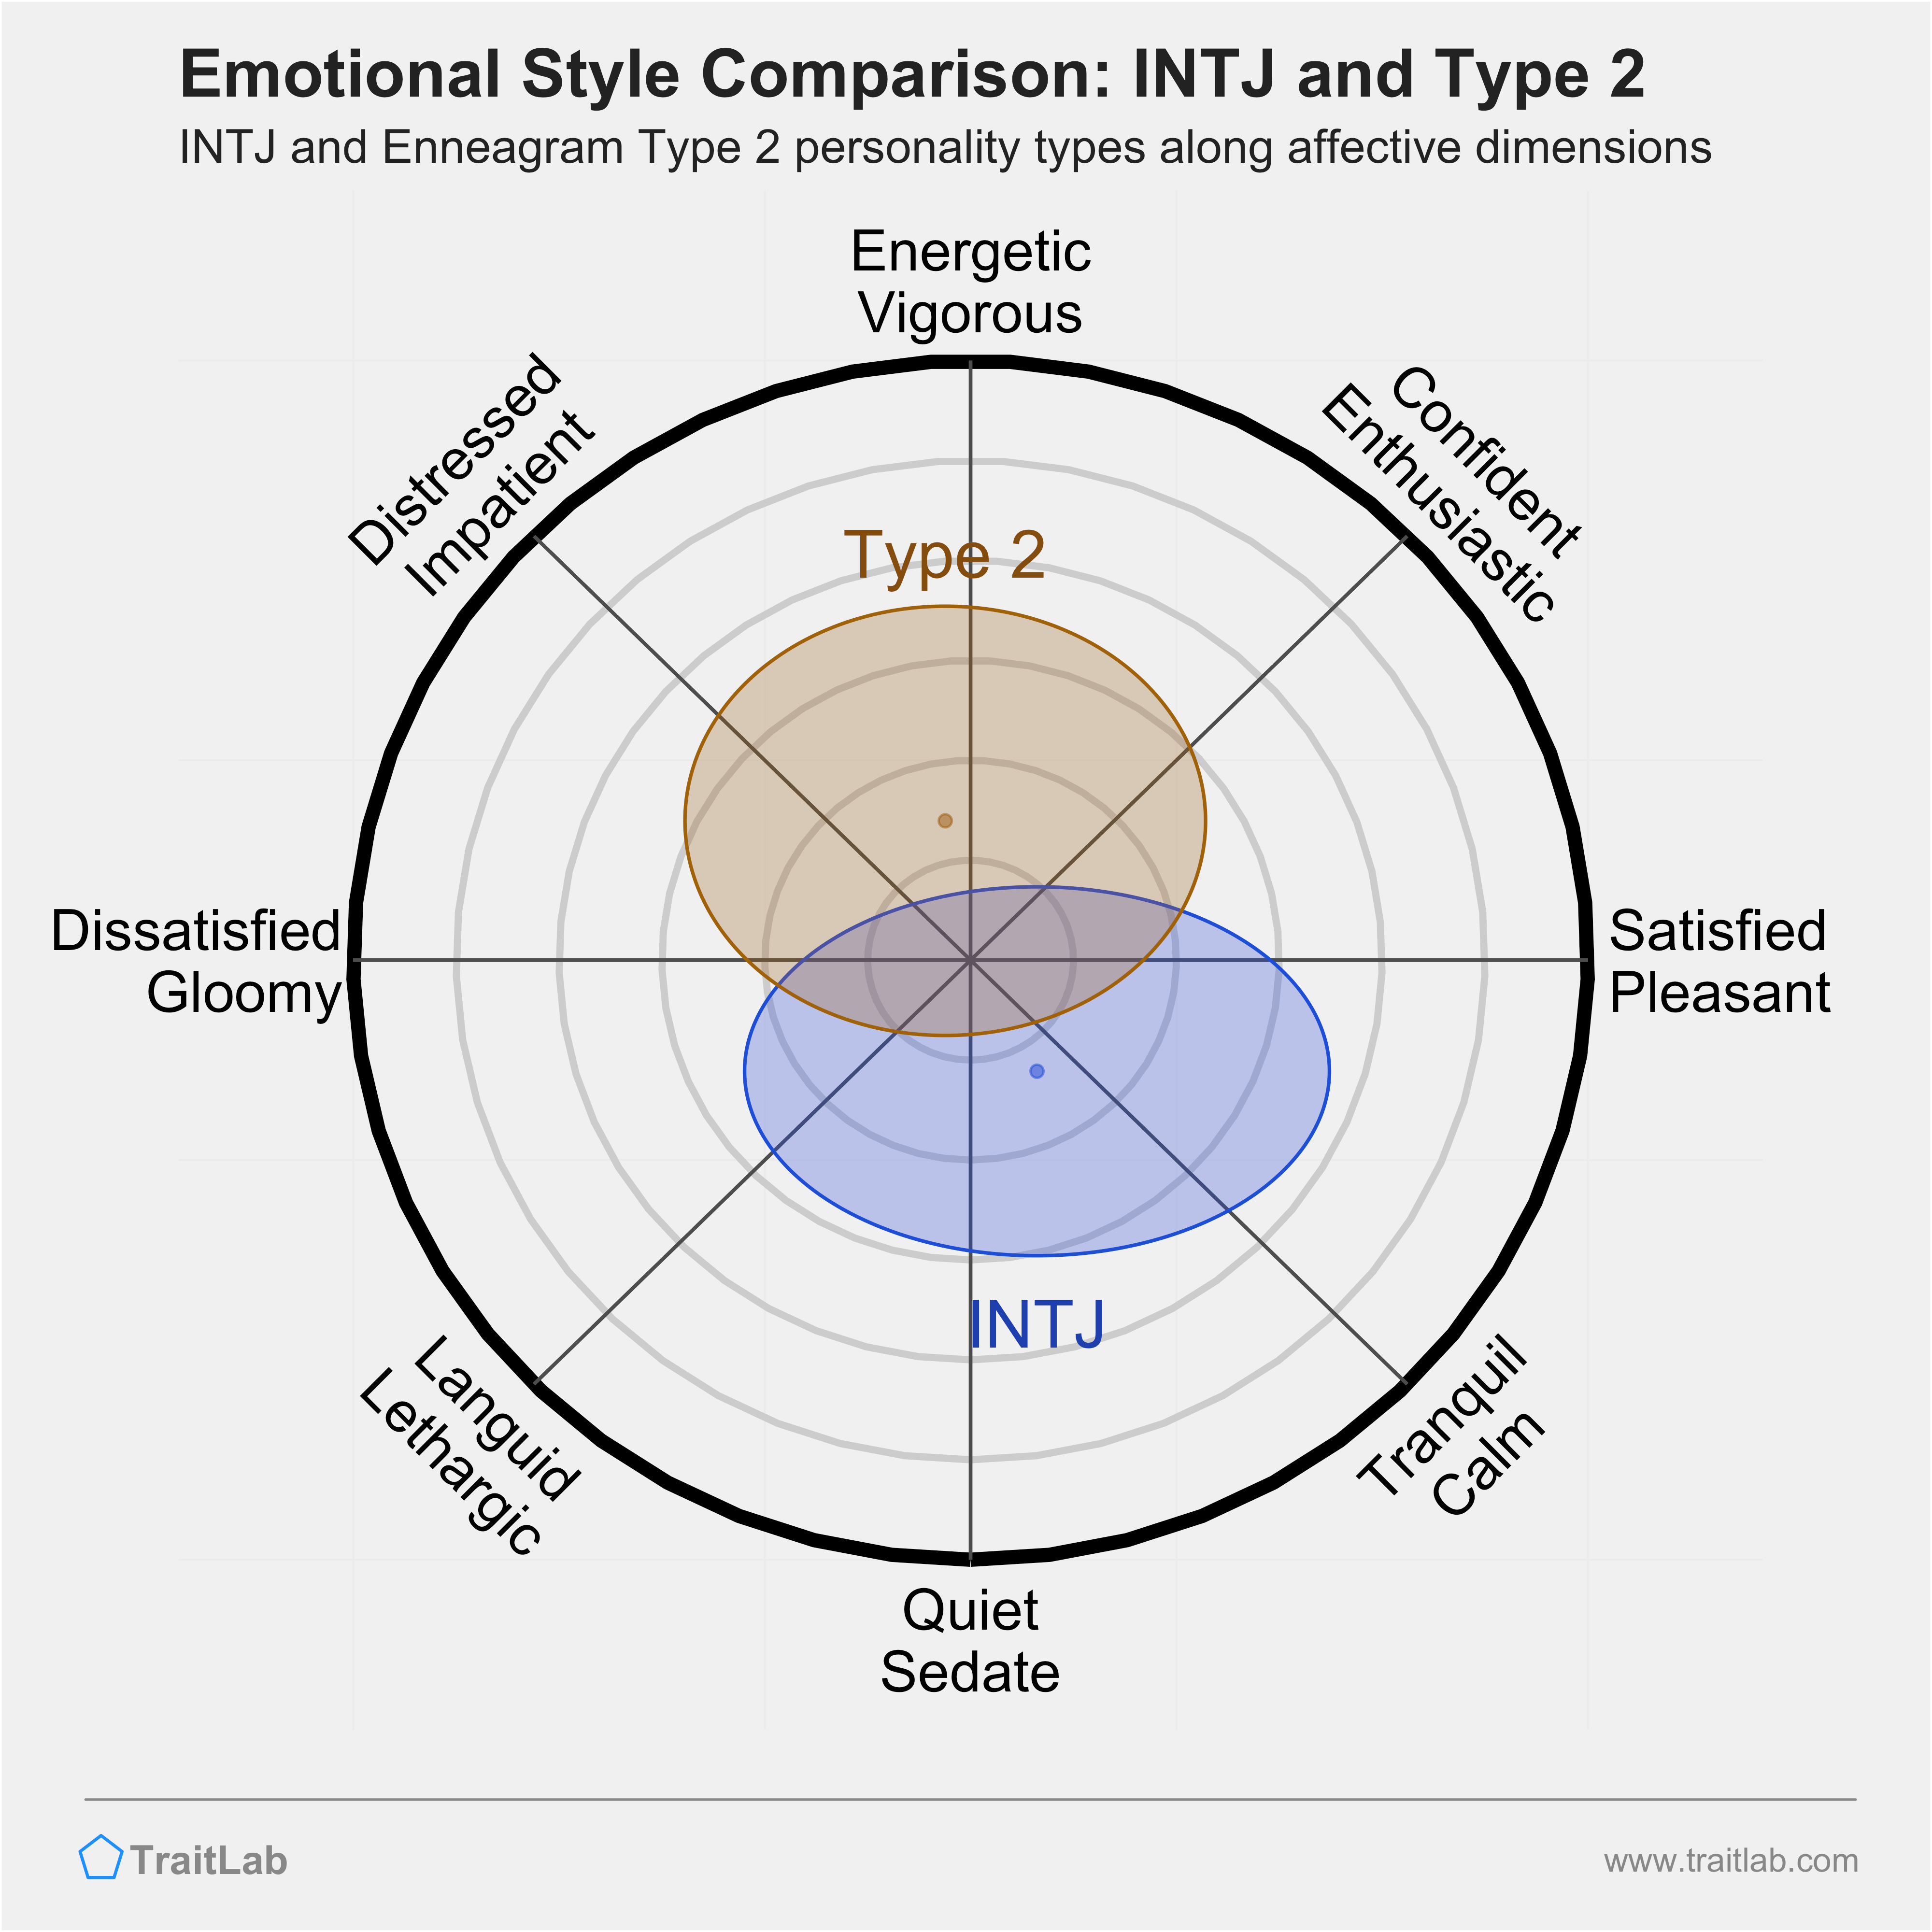 INTJ and Type 2 comparison across emotional (affective) dimensions